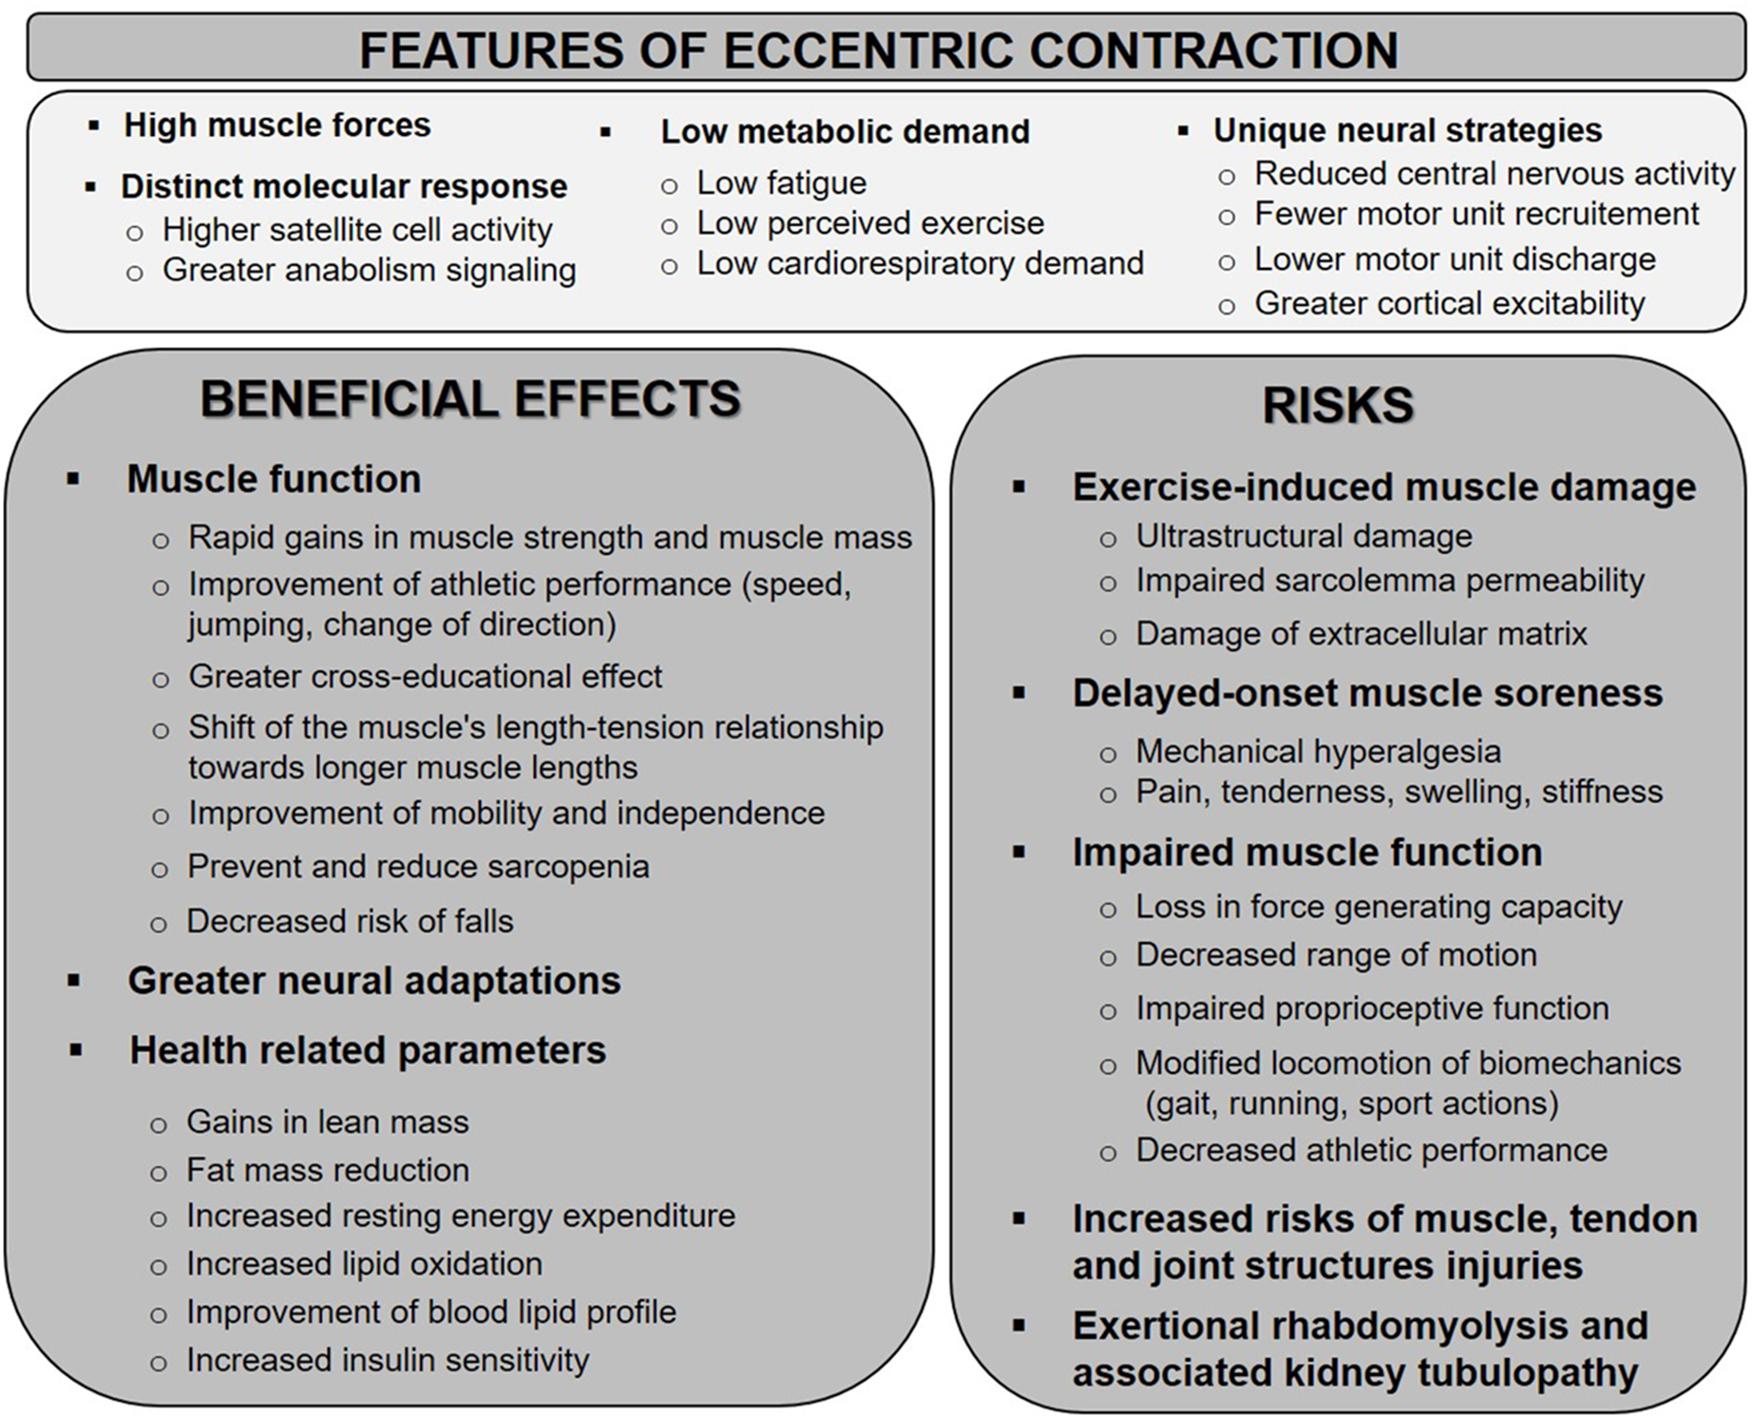 Exercise Physiology The Eccentric Contraction